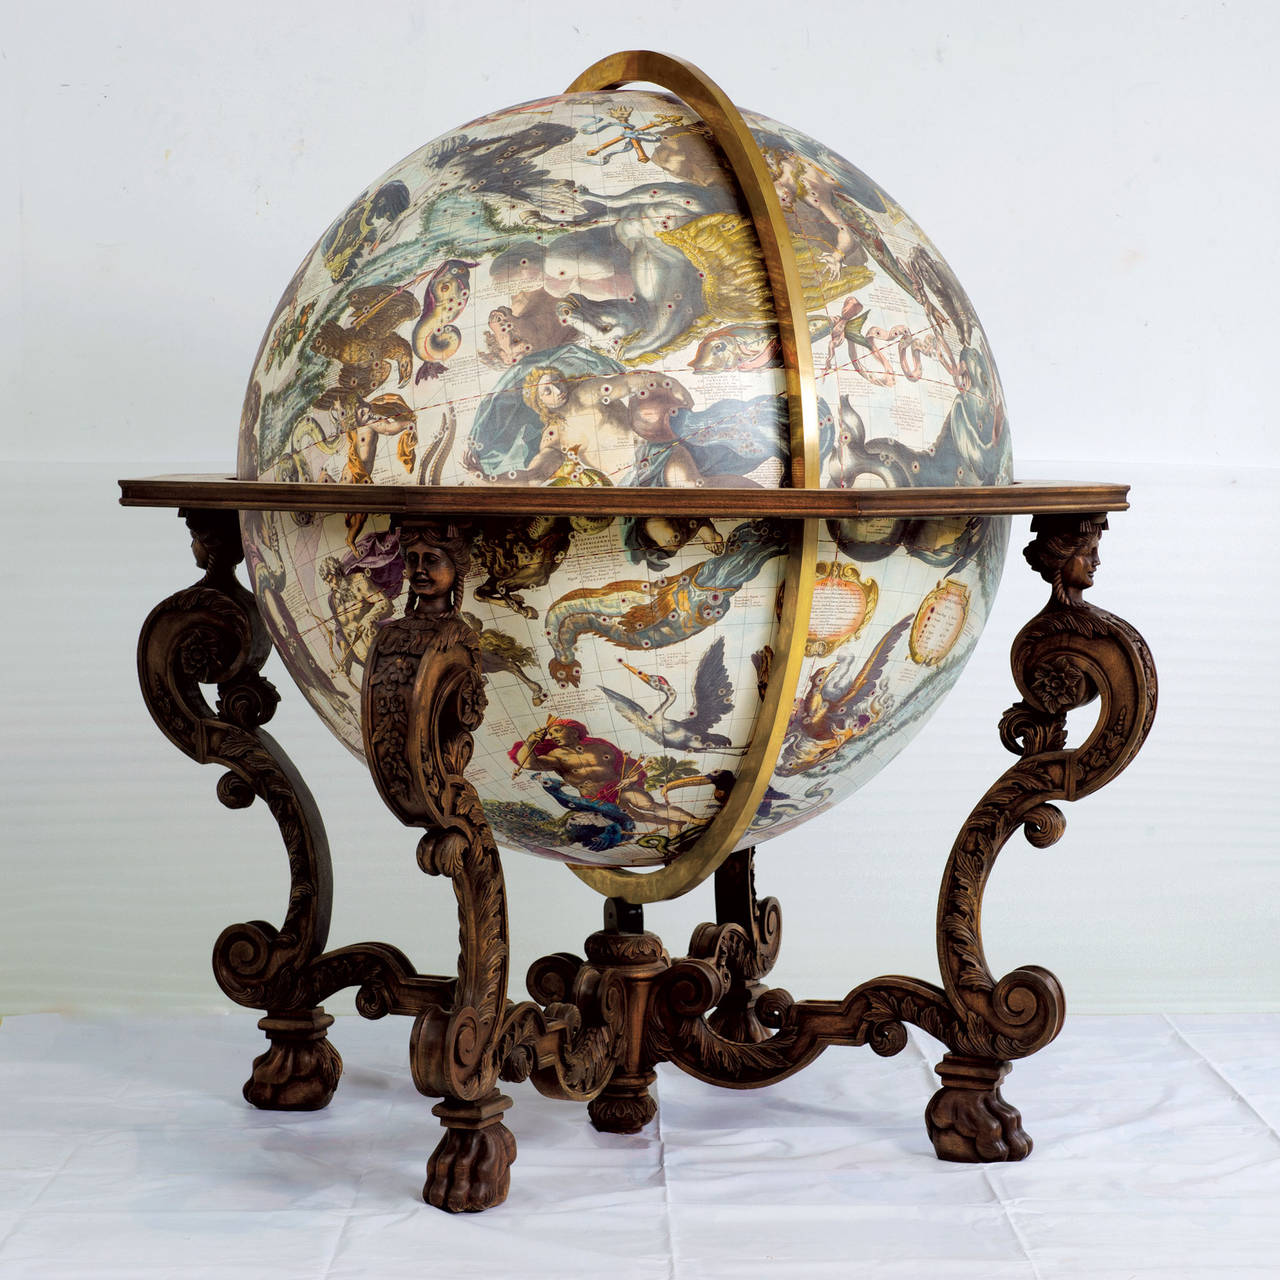 At the end of 17th century, Venitian monk, Vicenzo Coronelli, a cartographer produced the largest pair of globes ever made for King Louis XIV: 13 foot in diameter. As a publicity stunt, on the celestial globes, stars were placed in the position they